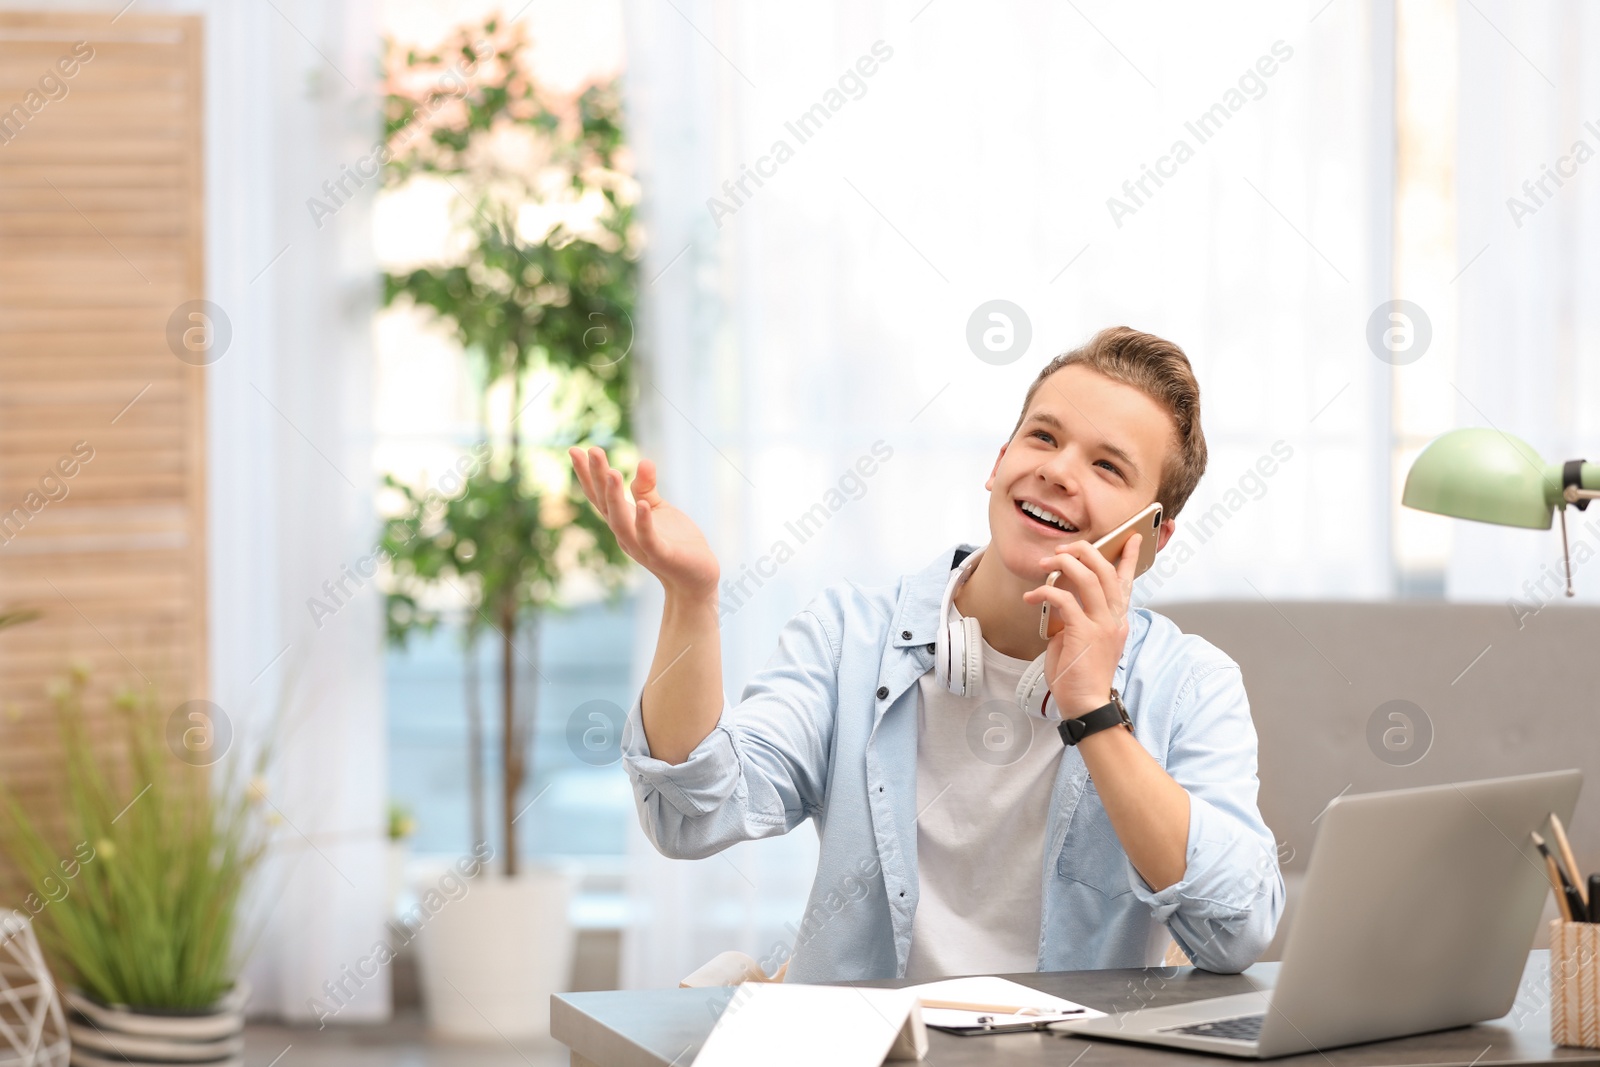 Photo of Handsome teenage boy talking on phone at table in room